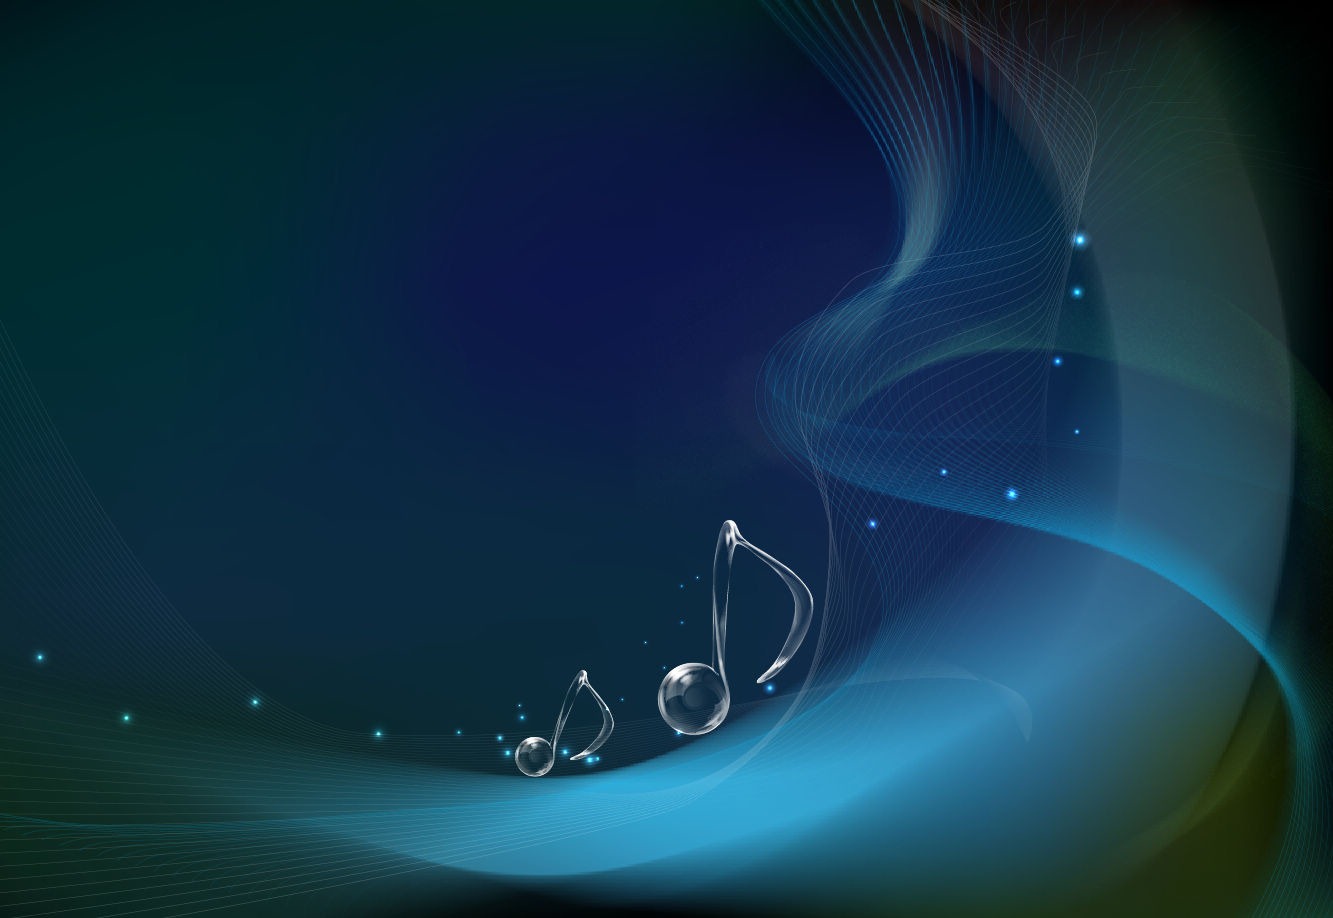 With wave abstract music notes pattern ppt background